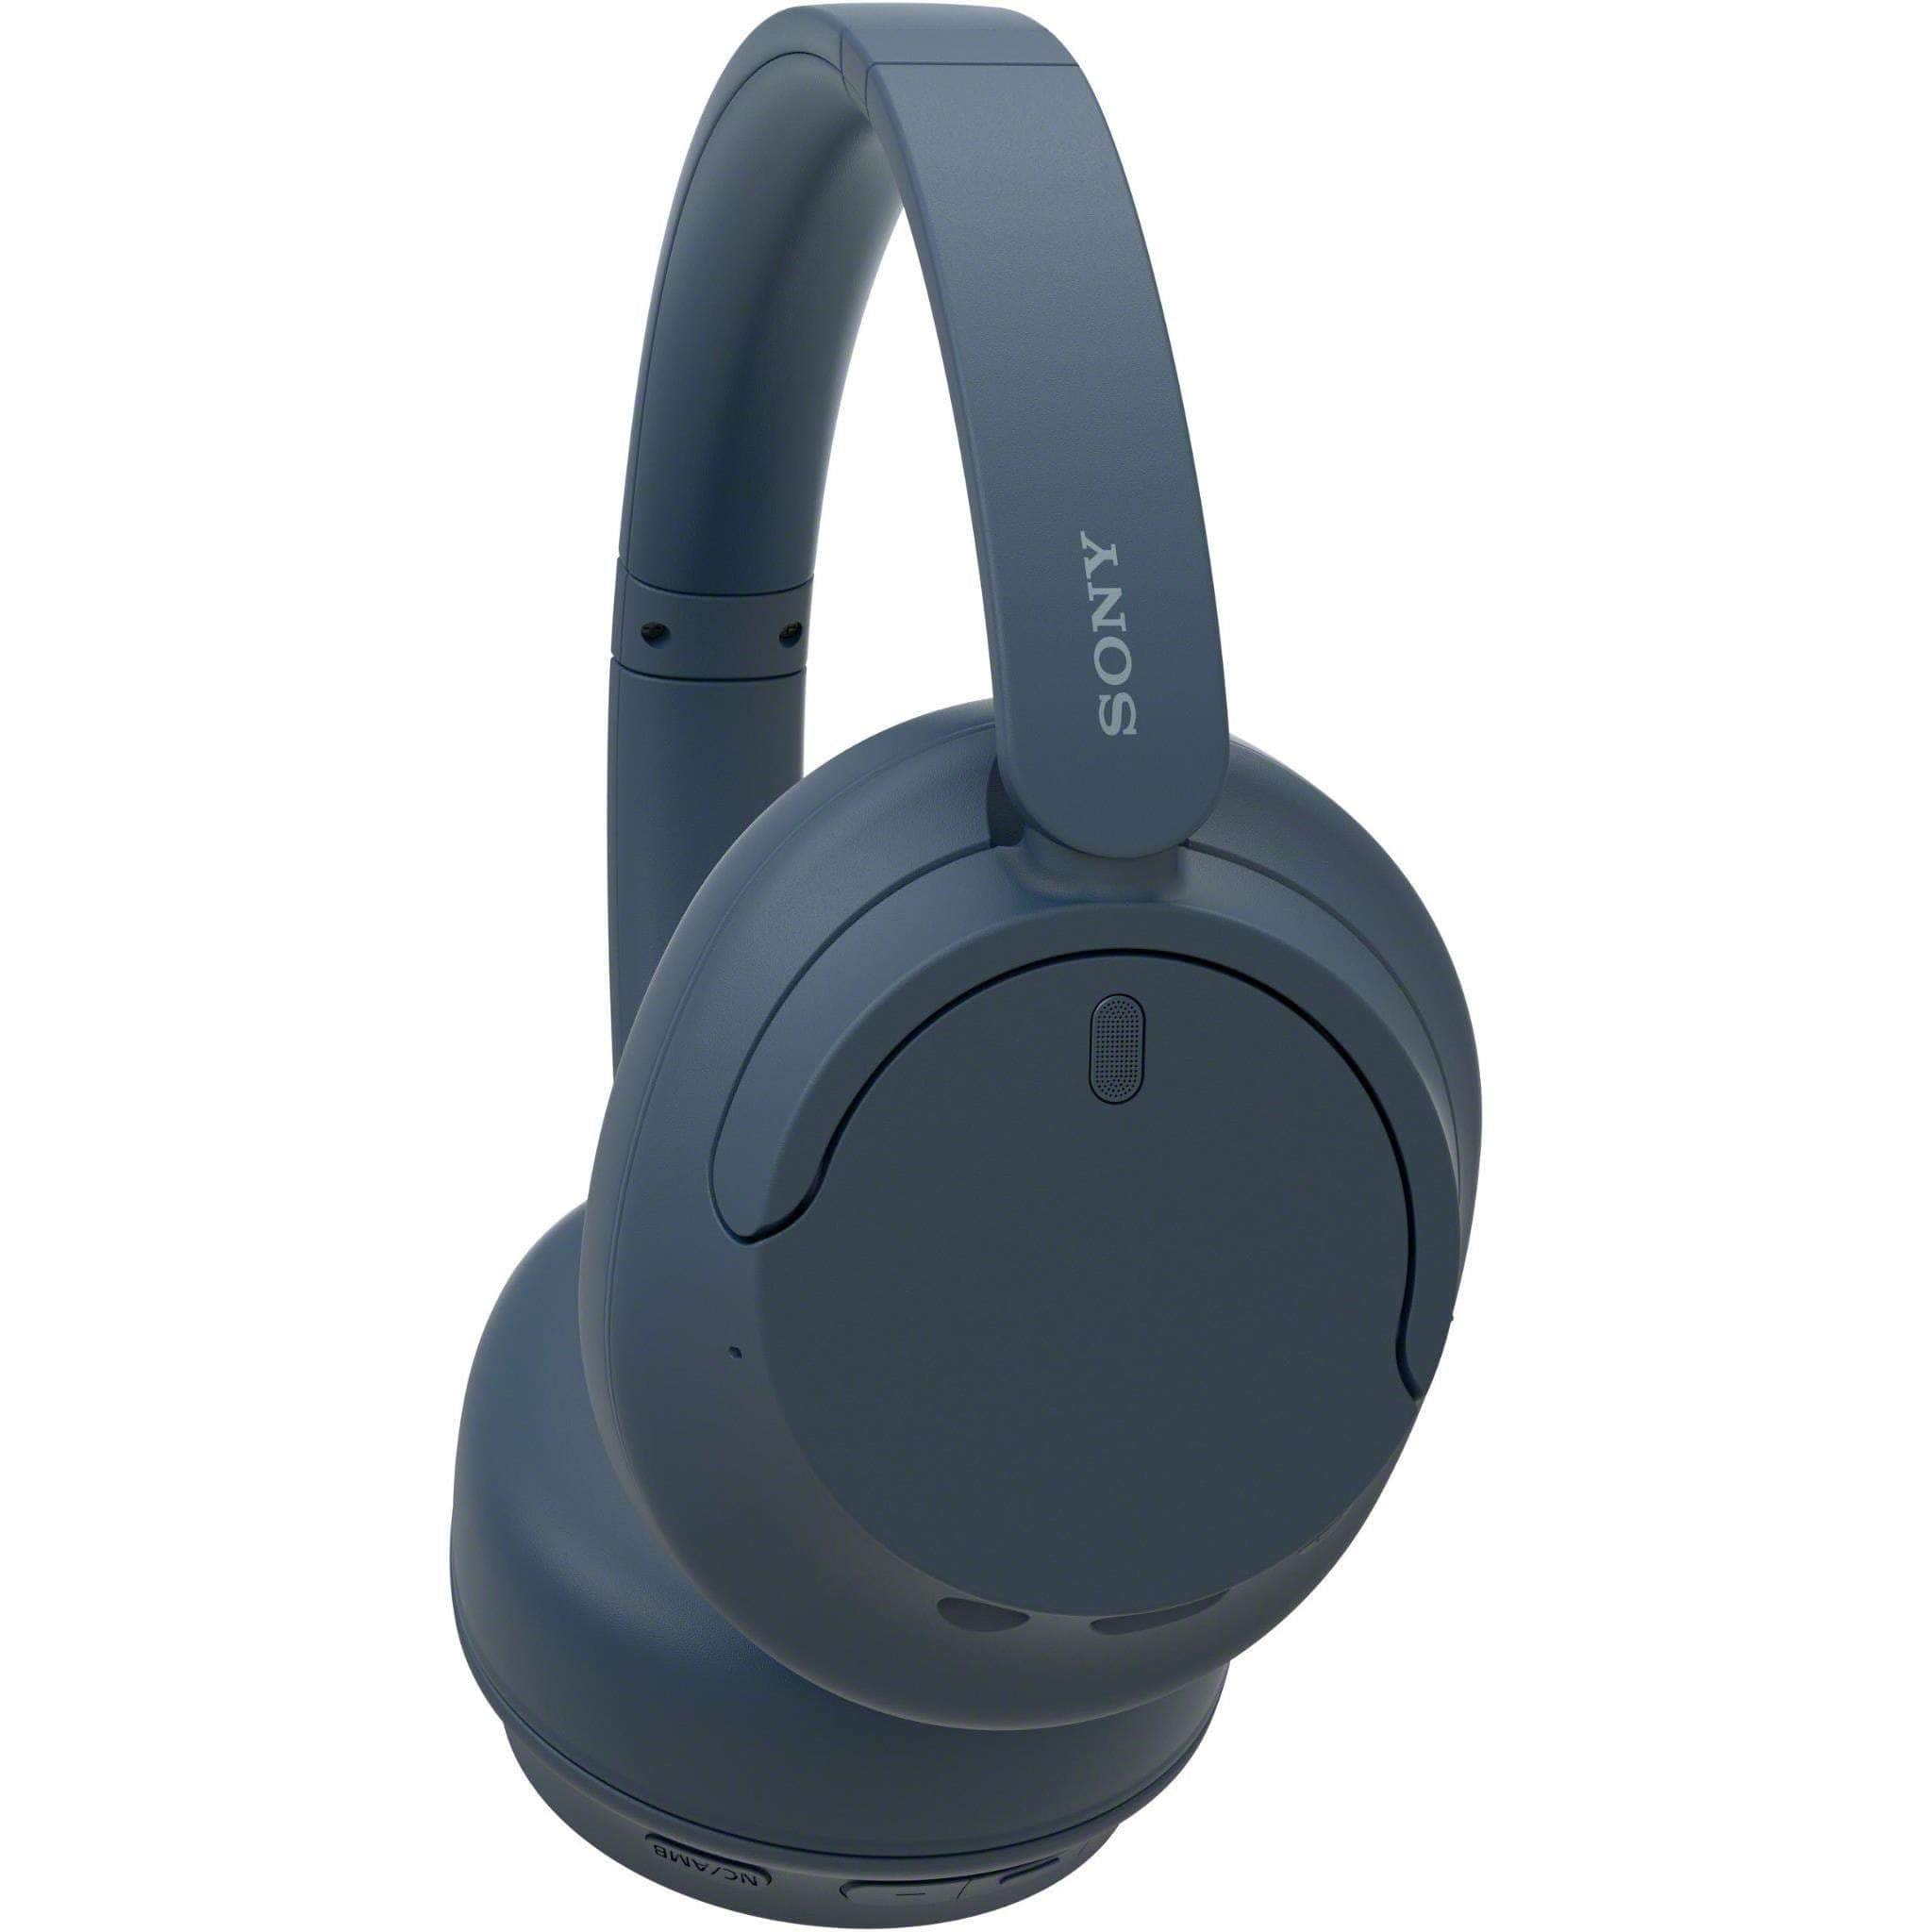 Sony Wireless Noise Cancelling Over-Ear Headphones (Blue)